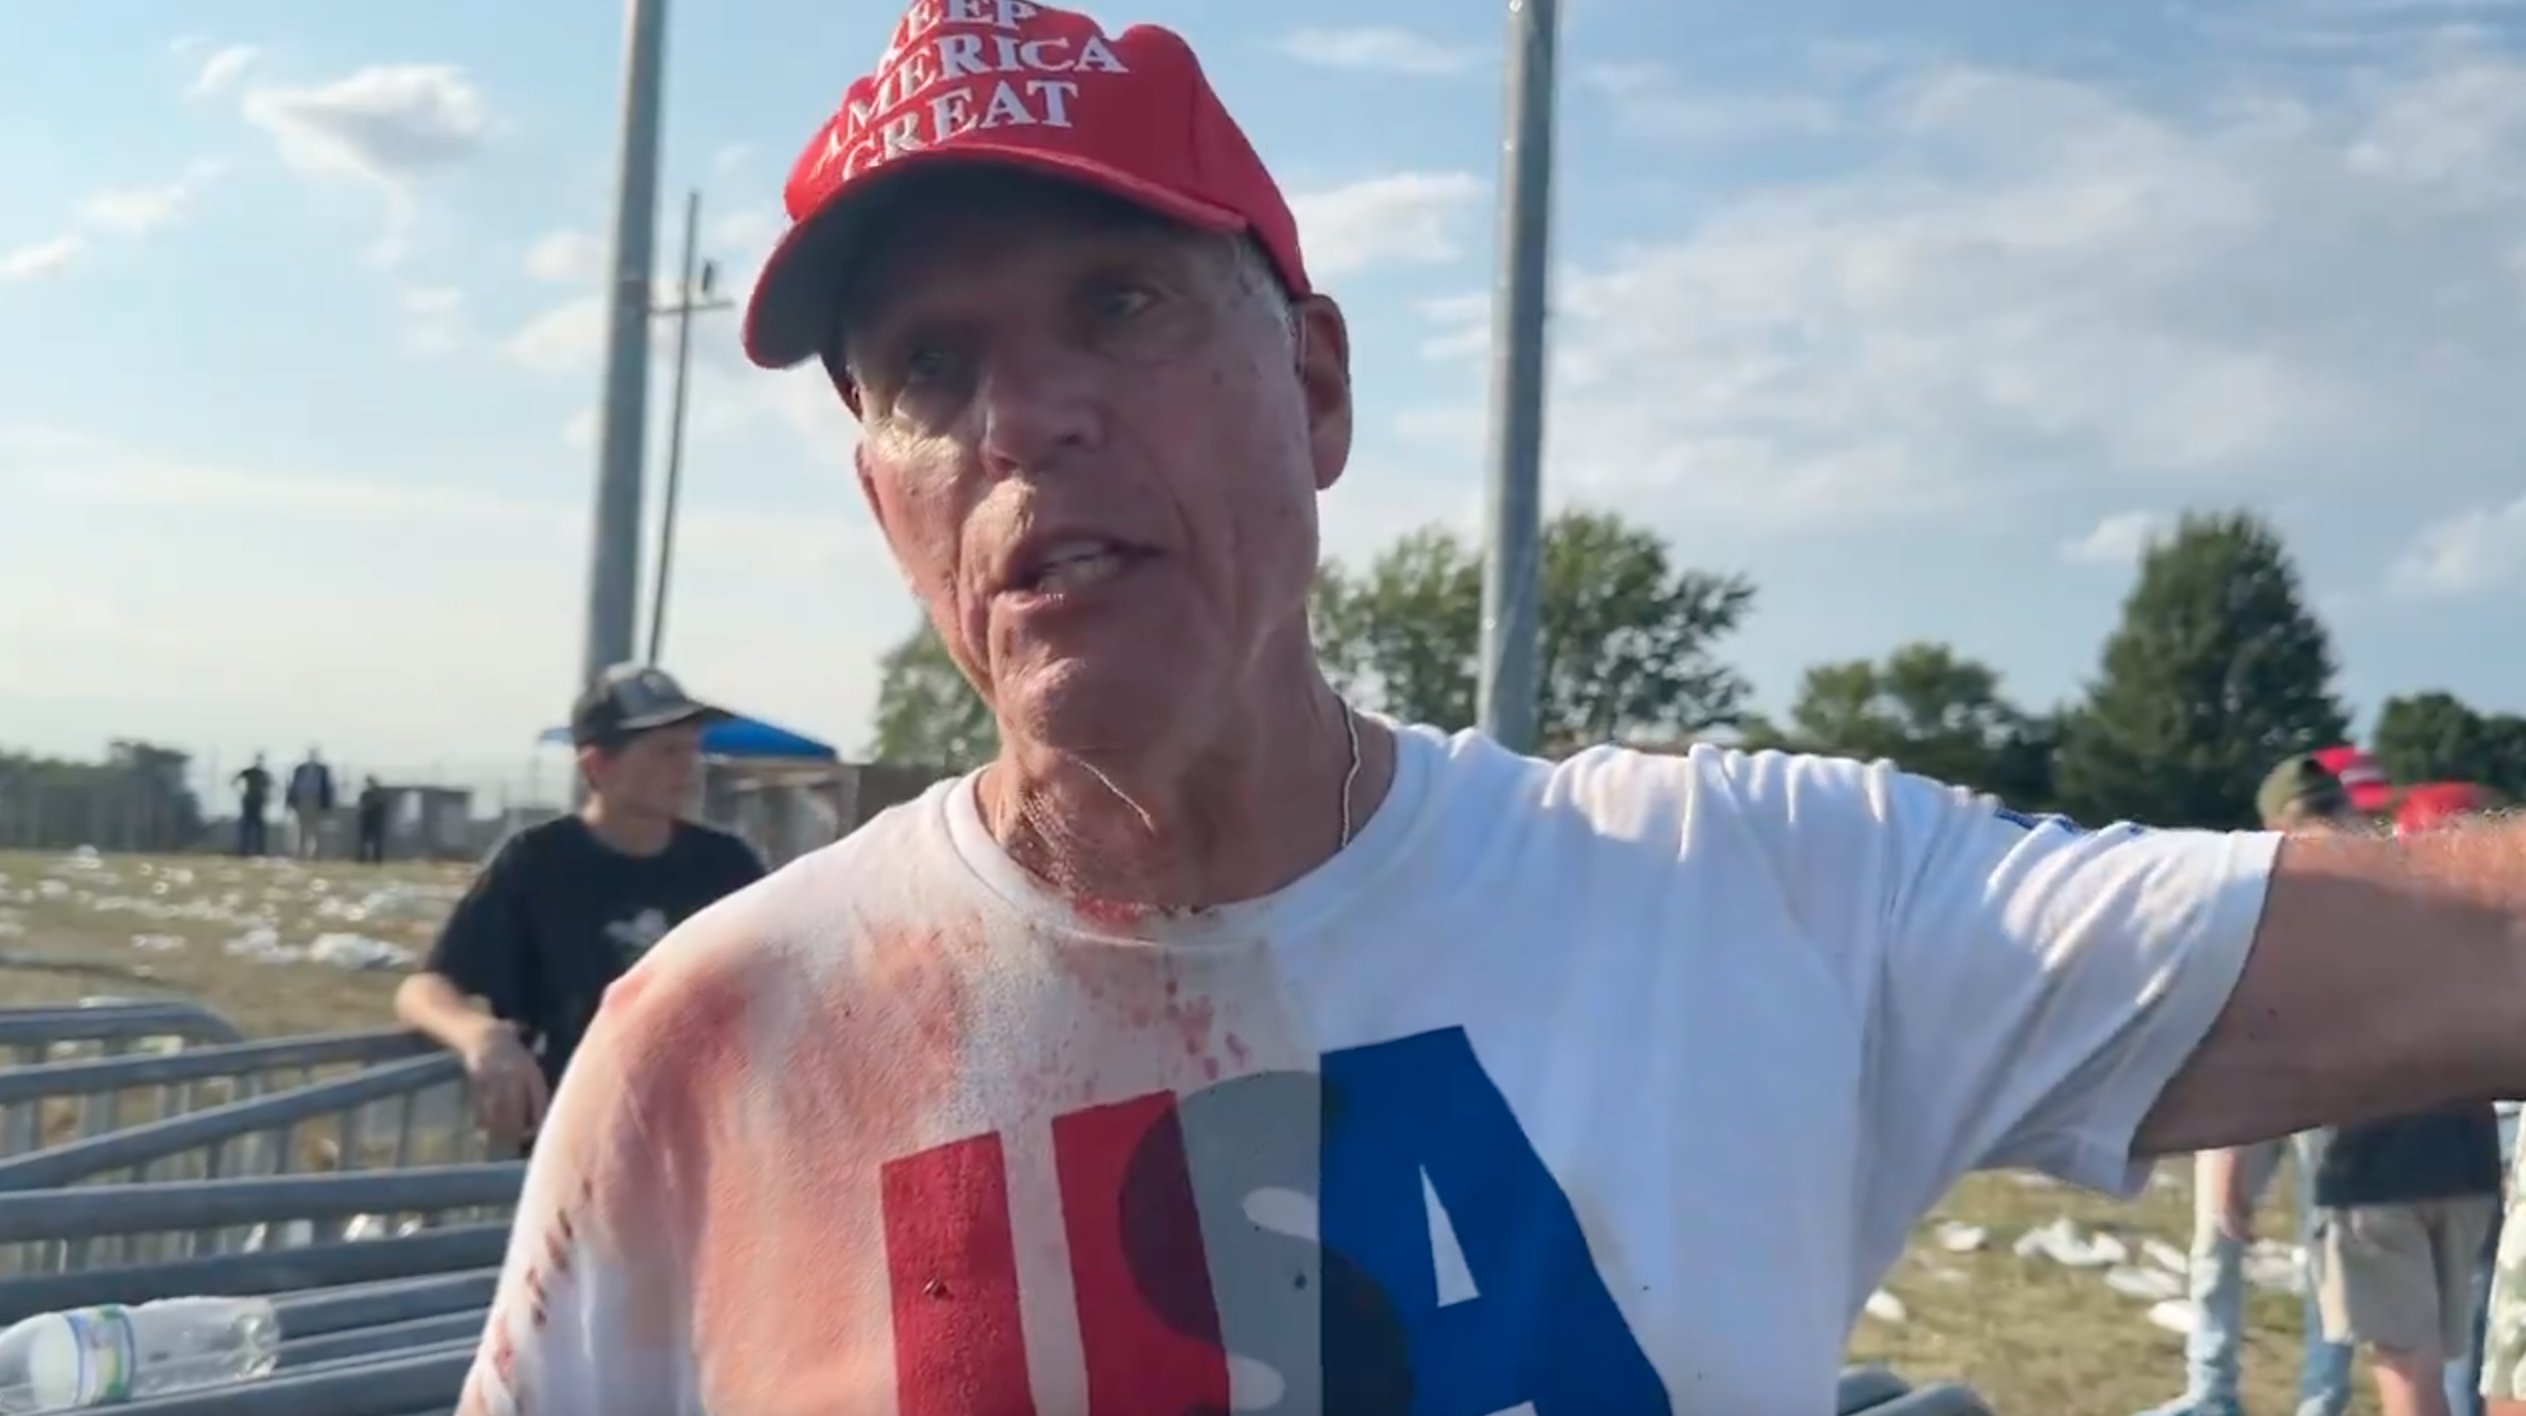 ‘Headshot’: Bloodied ER Doctor Describes Trying to Save Trump Rally-Goer Shot In Head